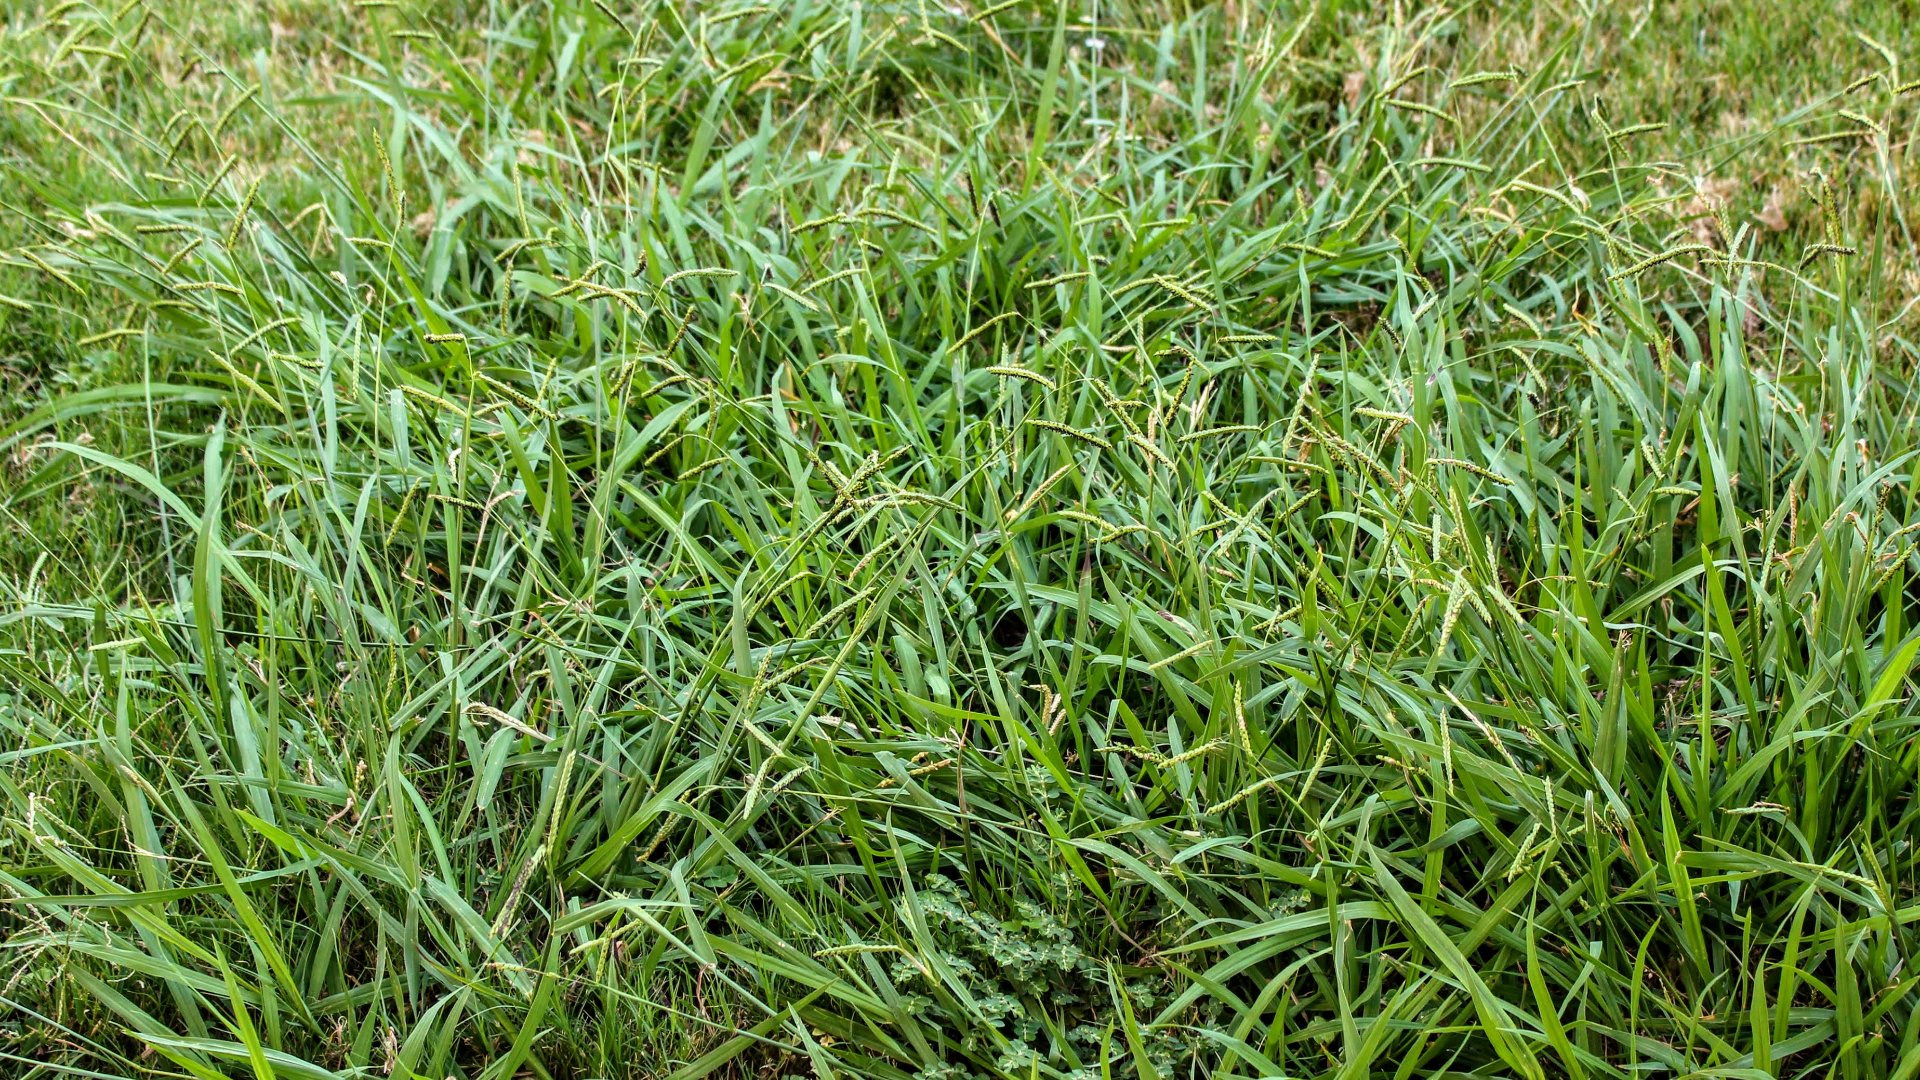 Do Lawns in Georgia Need Both Pre-Emergent & Post-Emergent Weed Control?